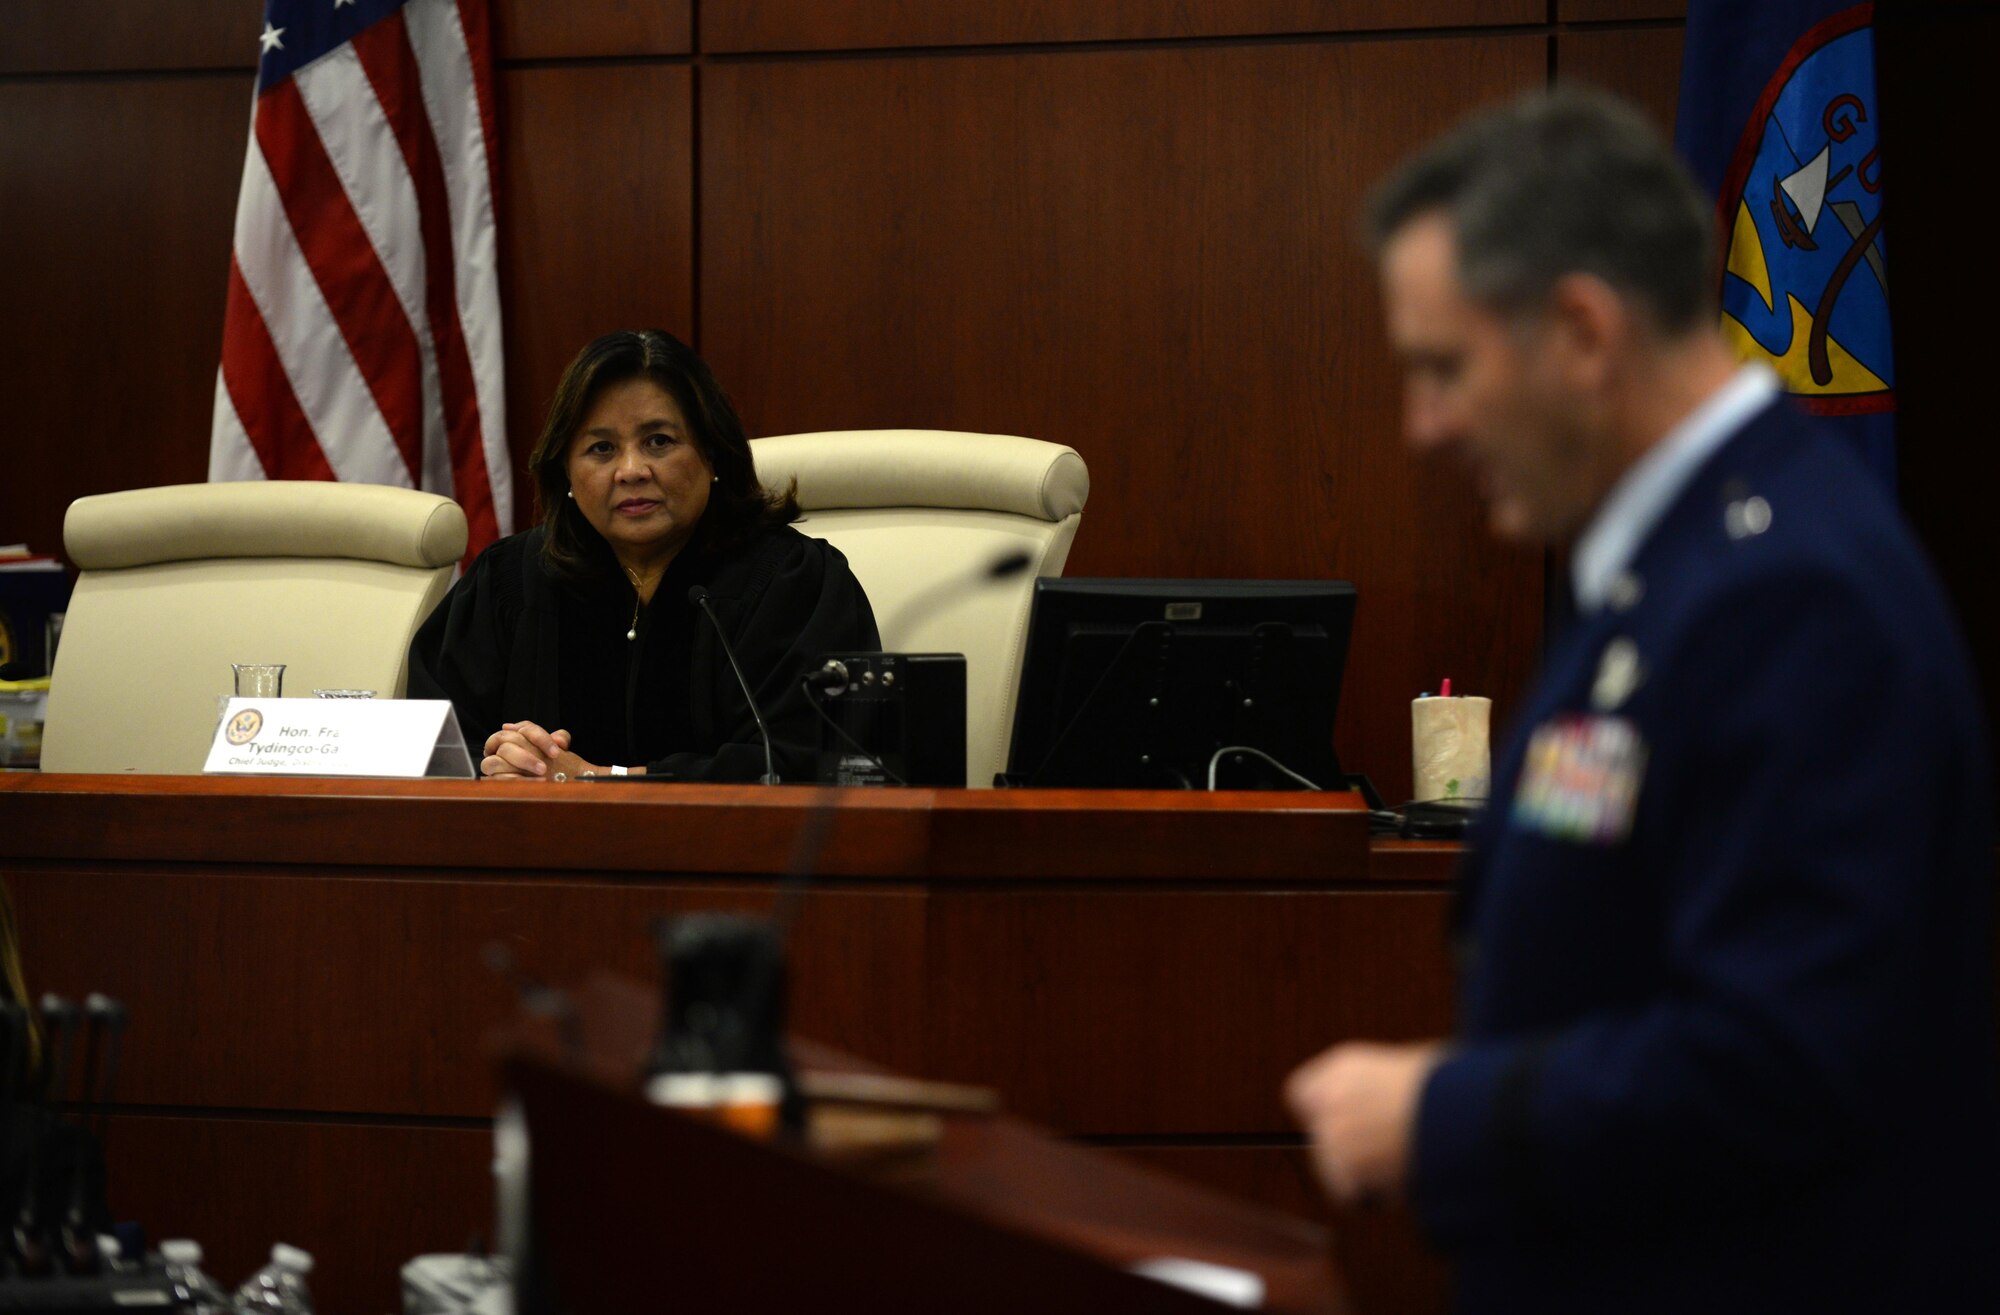 Frances Marie Tydingco-Gatewood, chief judge District Court of Guam, listens as Brig. Gen. Andrew Toth, 36th Wing commander, addresses newly naturalized U.S. citizens July 2, 2015, in Hagåtña, Guam. Twenty-four immigrants, originally from the Federated States of Micronesia, the Philippines, South Korea, Taiwan, Thailand and Vietnam, received their U.S. citizenship. (U.S. Air Force photo by Senior Airman Alexander W. Riedel/Released)
